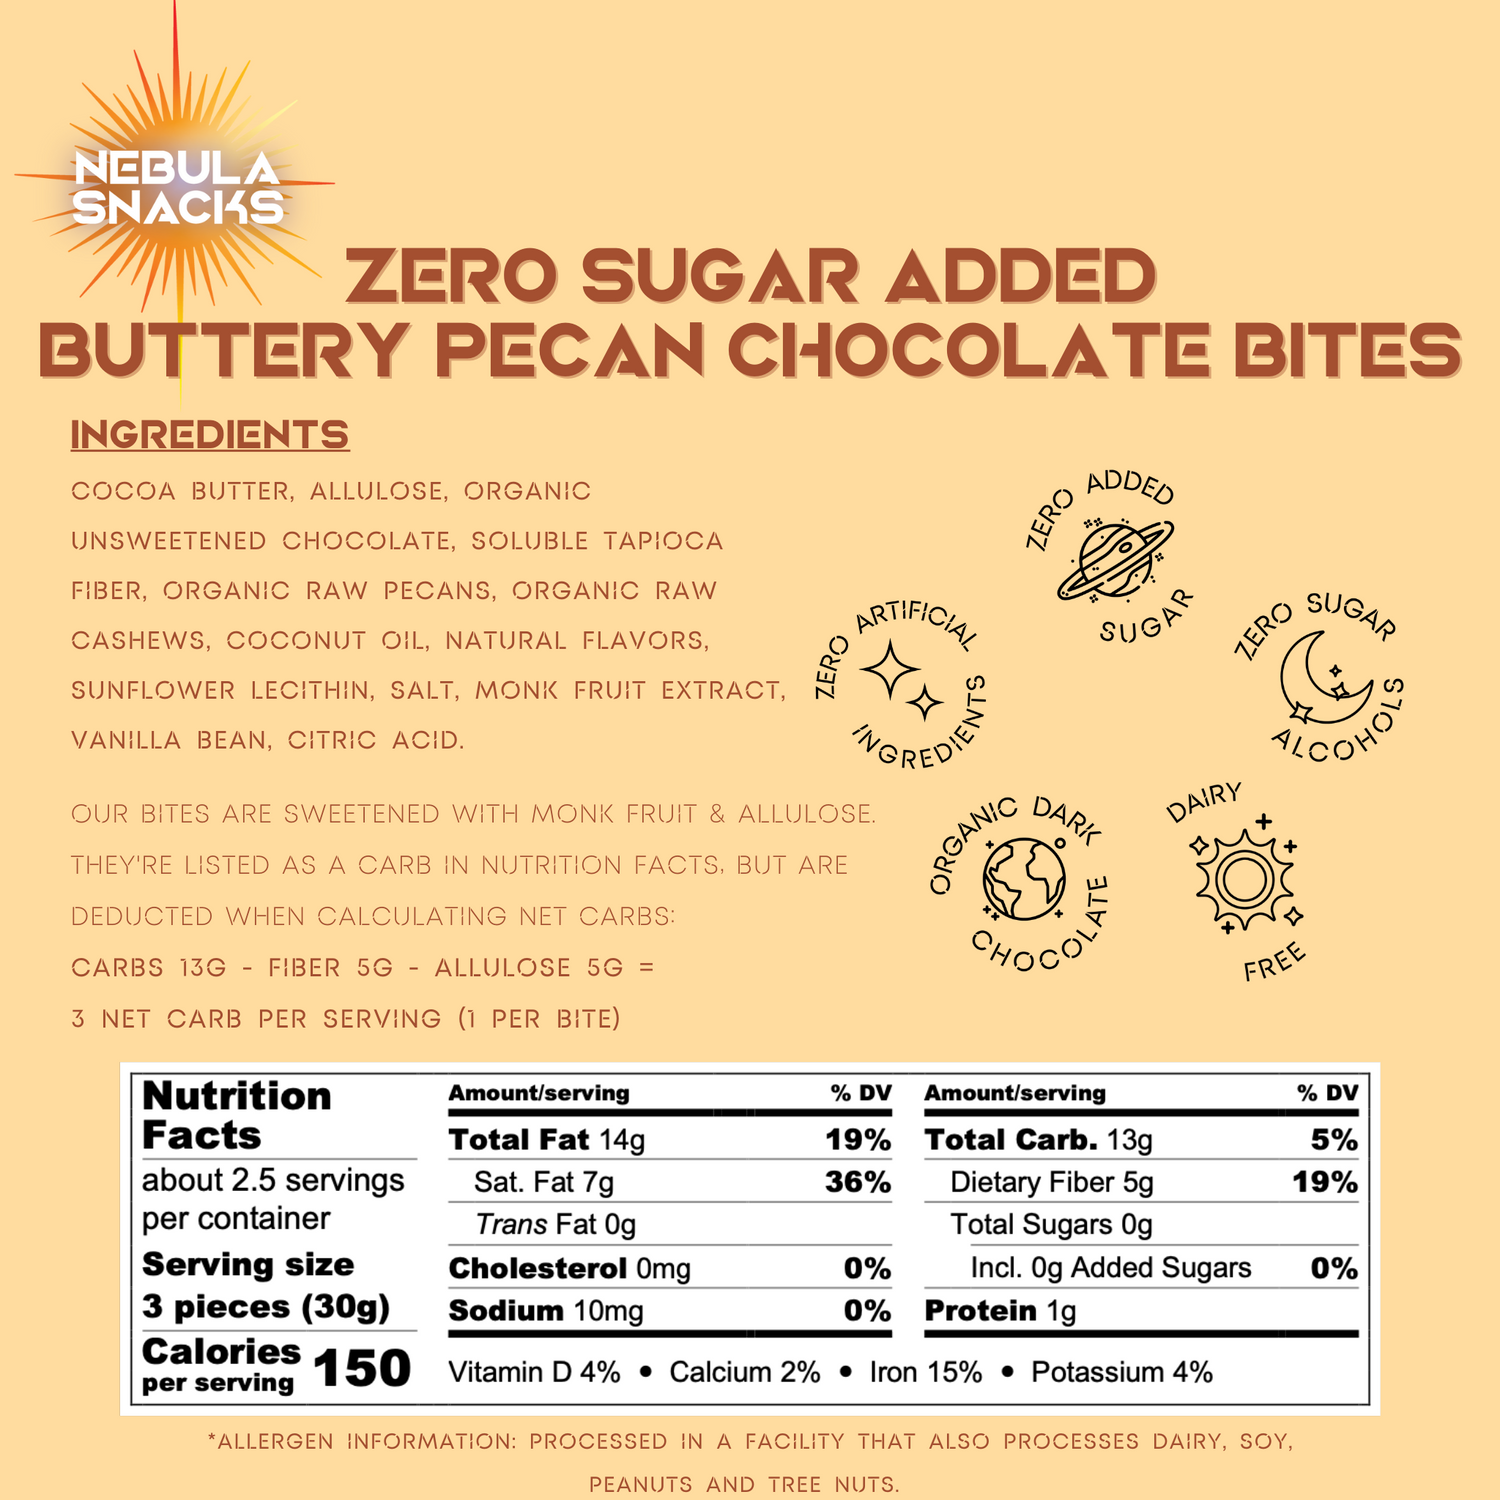 Nebula Snacks - Zero Sugar Added Buttery Pecan Chocolate Bites - Nutrition Facts &amp; Ingredients